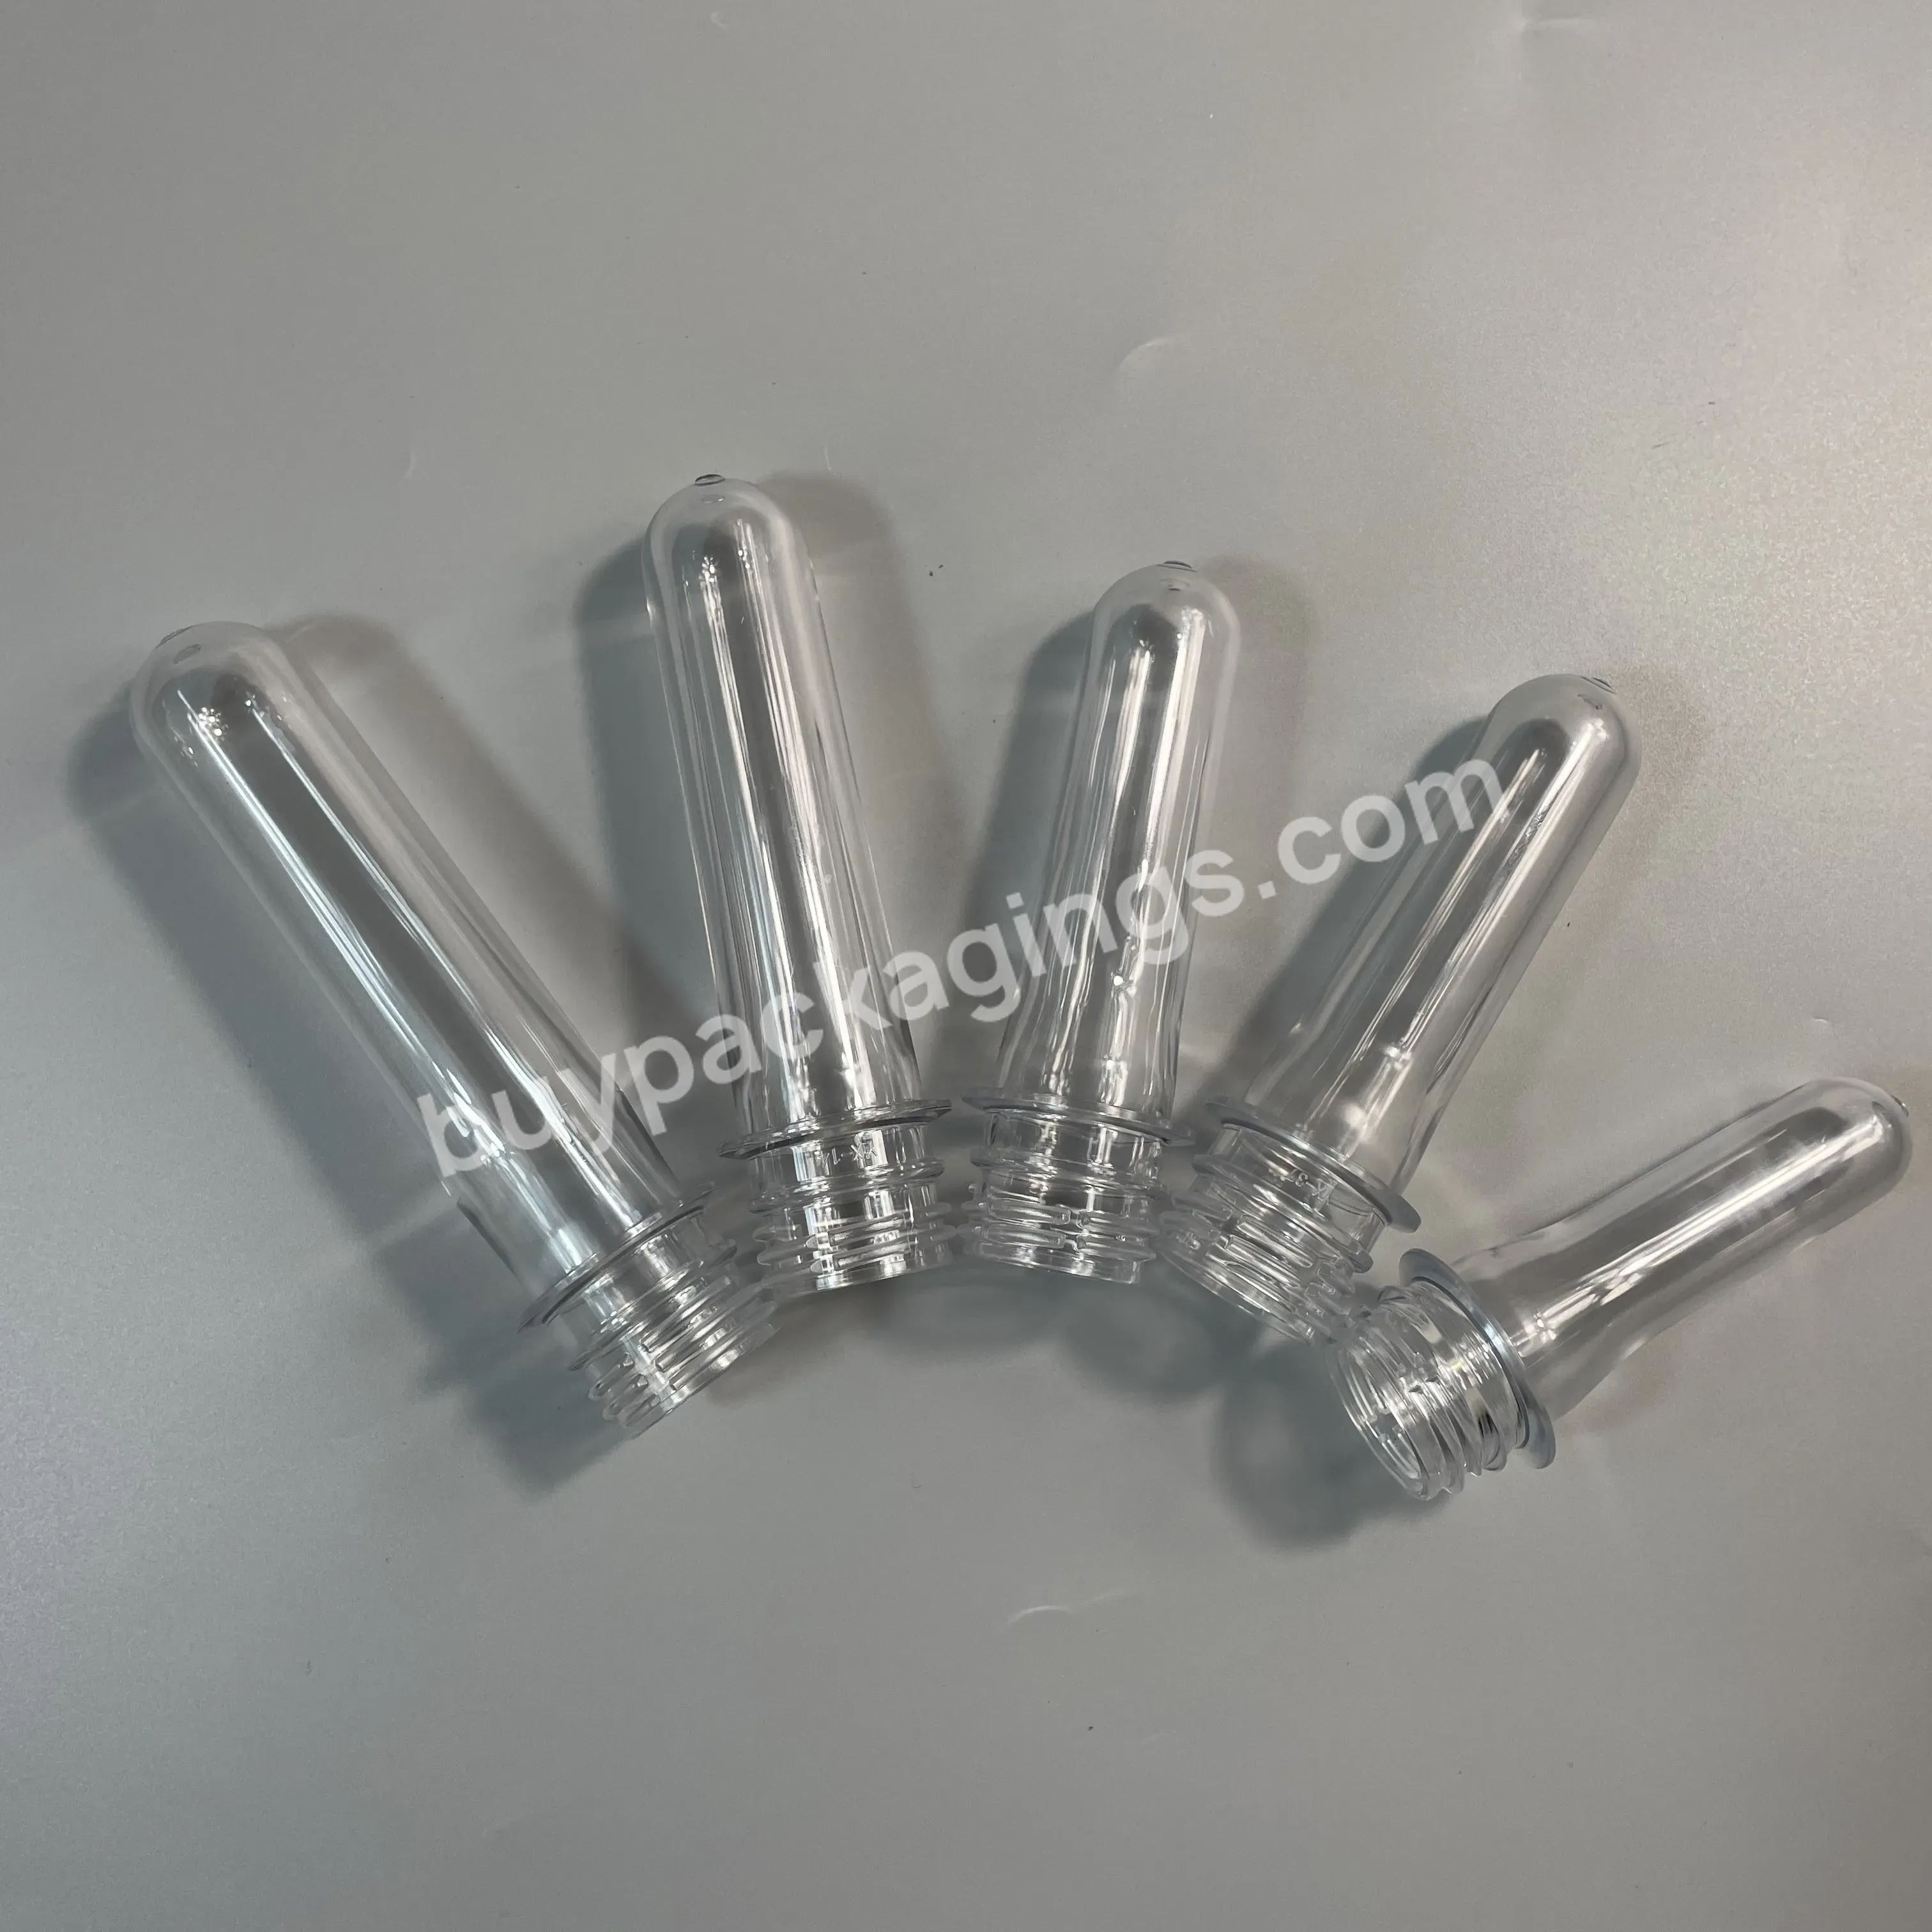 Professional Chinese Pco1880 Pet Pco Neck 14g 20g 22g 25g 28g 36g 38g Pet Preform For Water Bottle